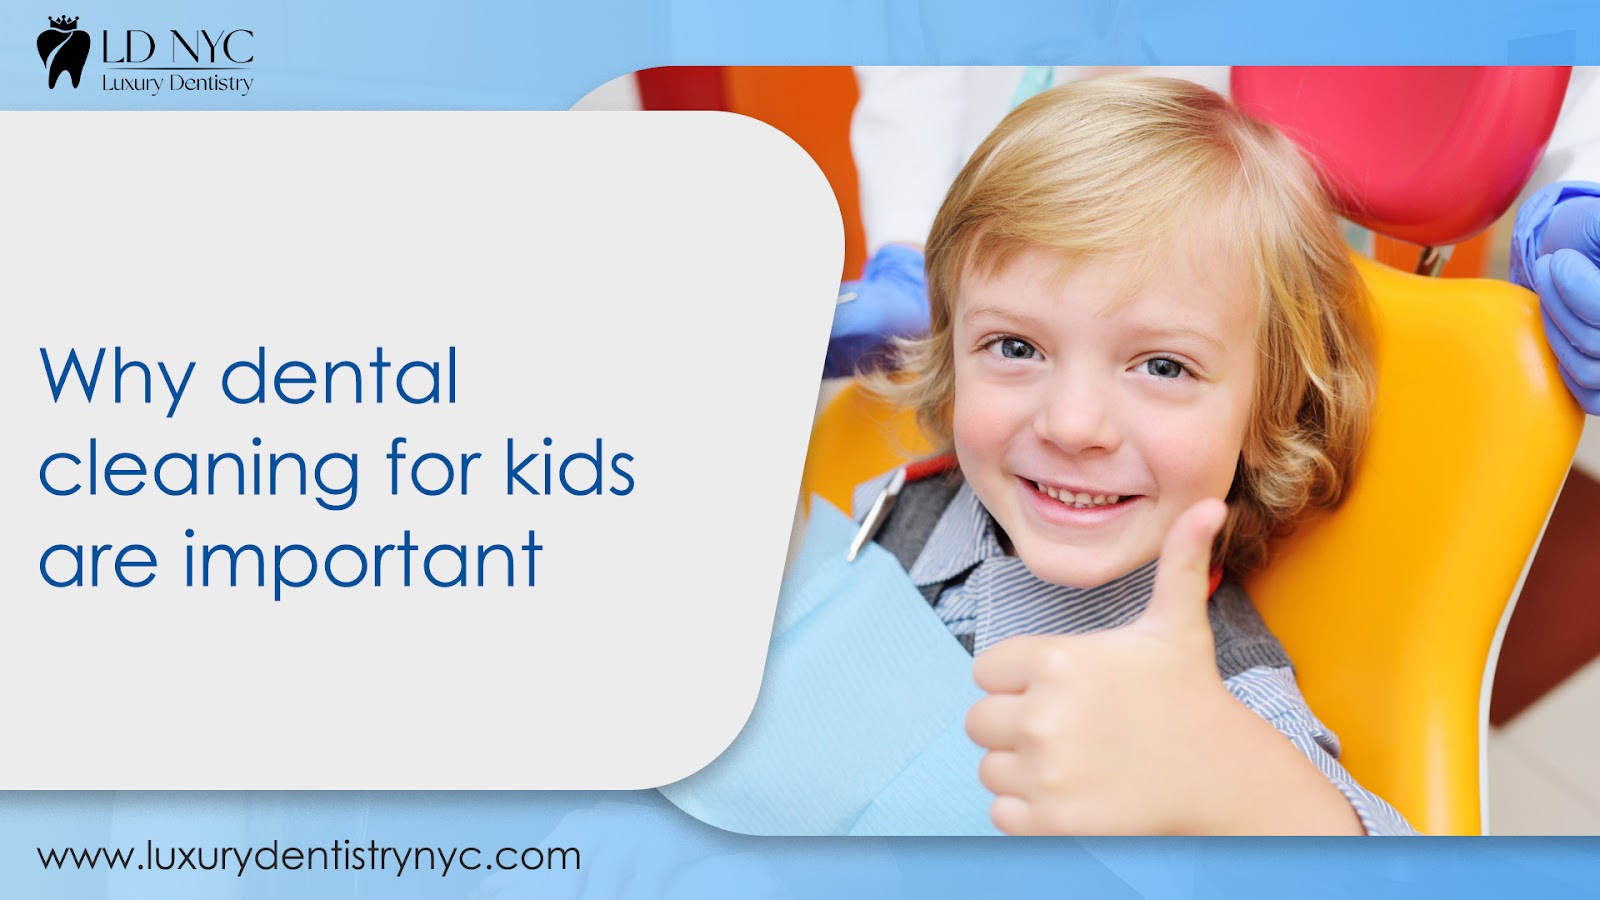 Why dental cleaning for kids is important